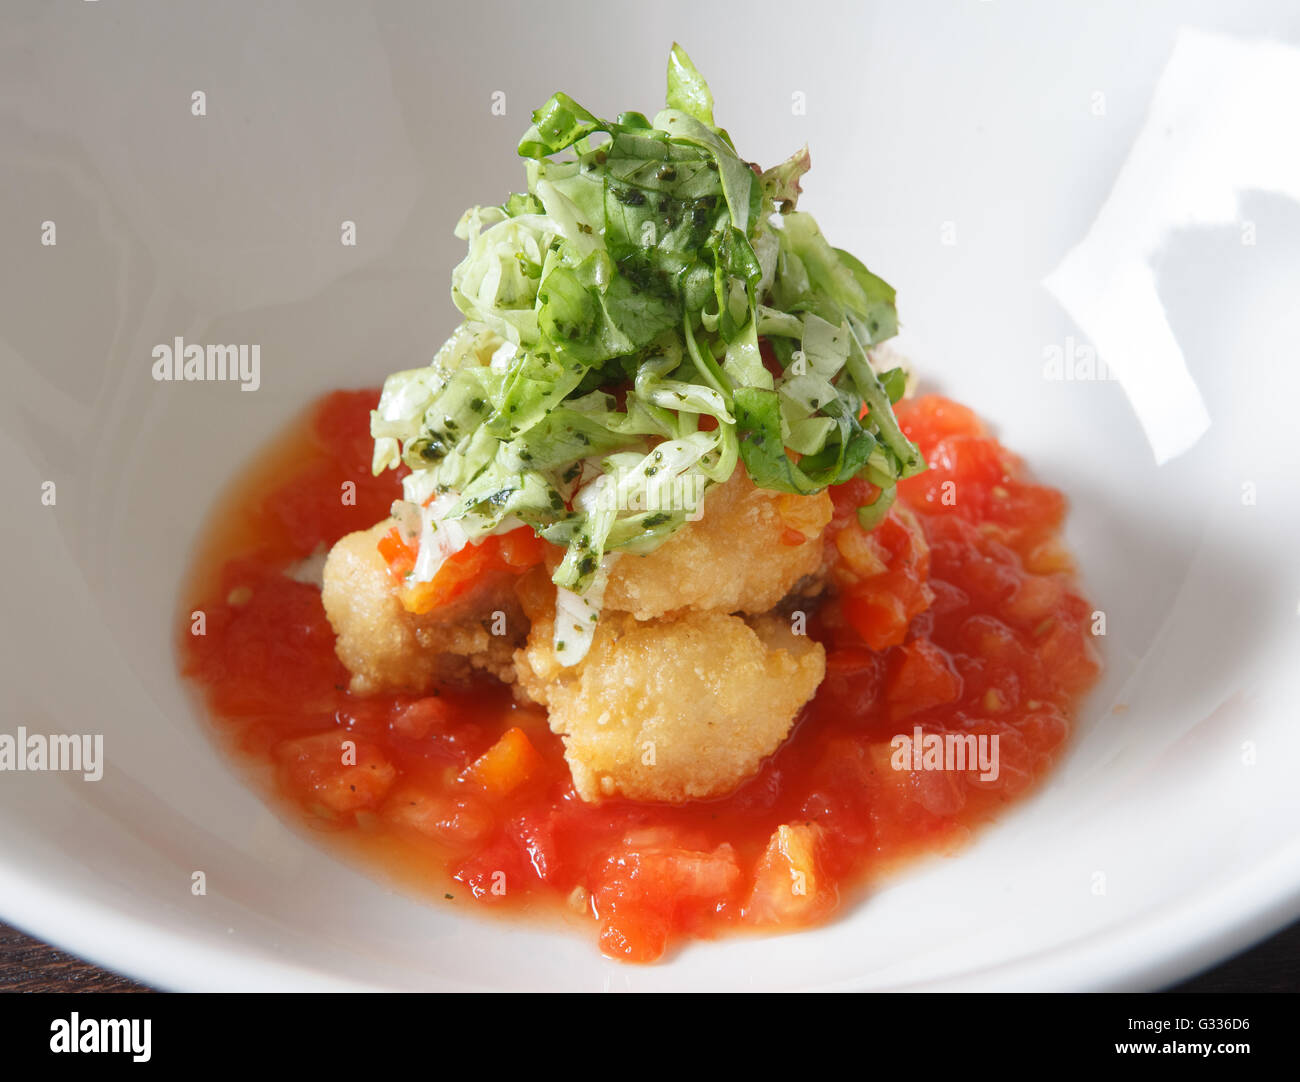 Fried chicken in breadcrumbs with tomato sauce  Decorating a dish of Japanese and Asian cuisine. White dish on wooden background Stock Photo